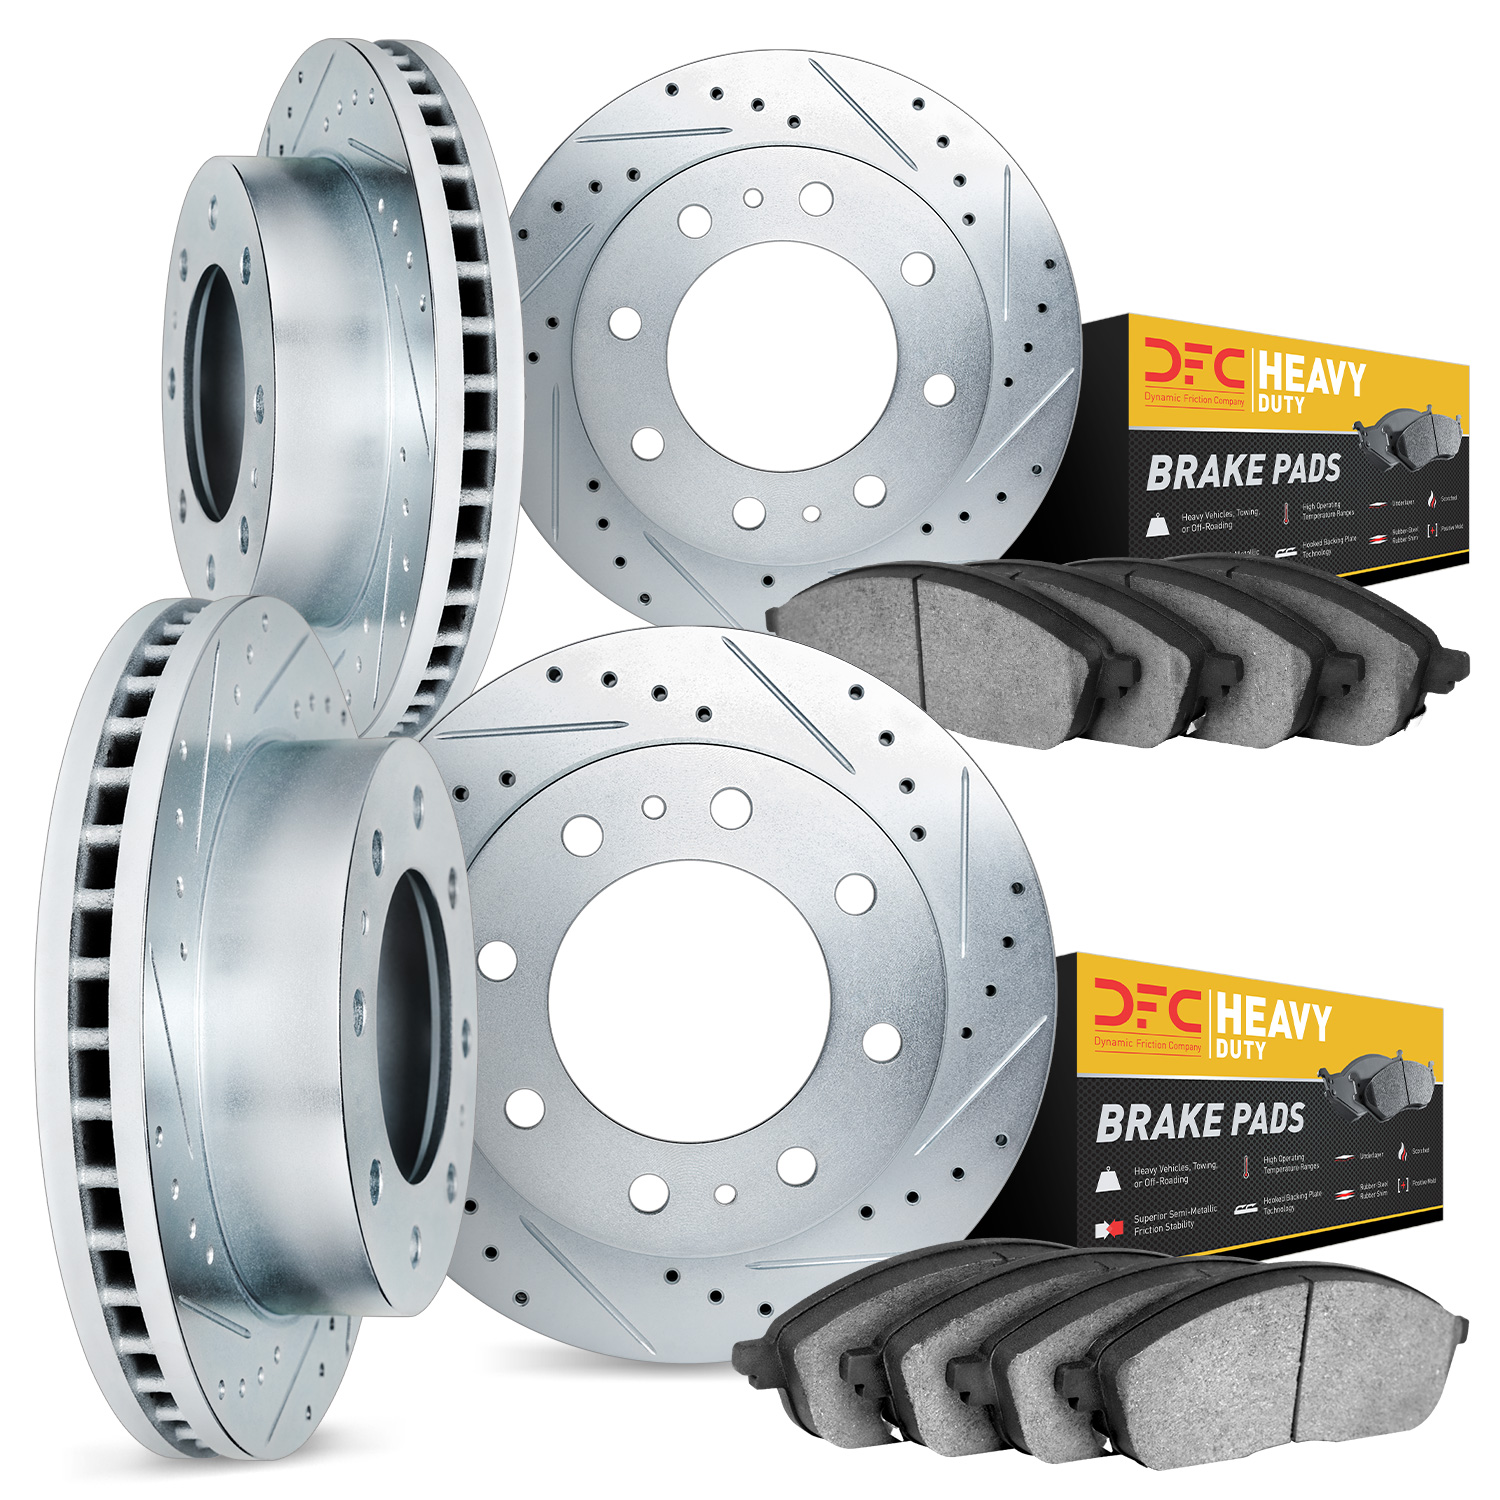 7204-48148 Drilled/Slotted Rotors w/Heavy-Duty Brake Pads Kit [Silver], 2003-2020 GM, Position: Front and Rear